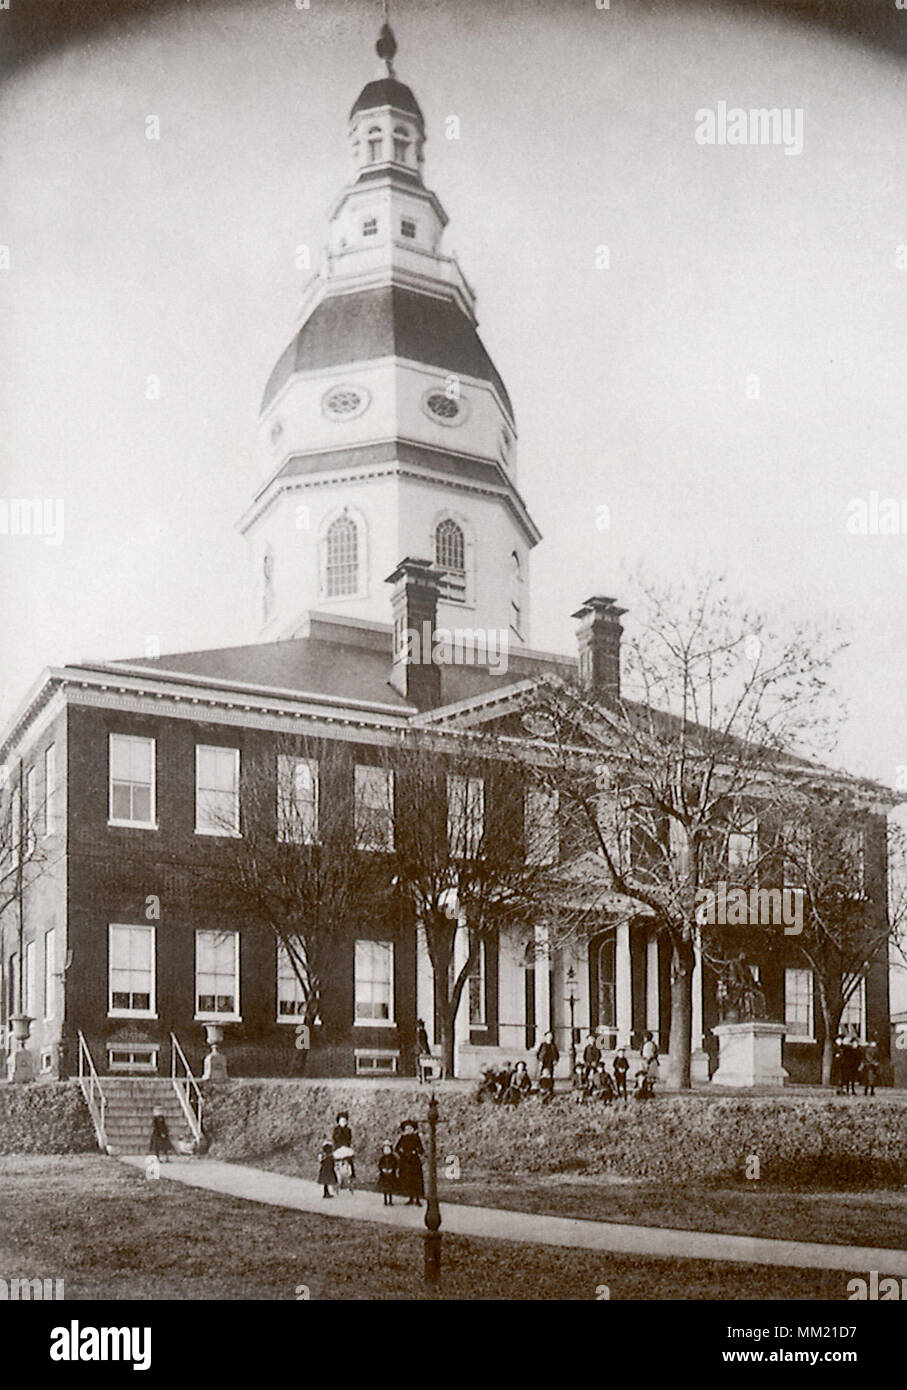 Le Maryland State House. Annapolis. 1890 Banque D'Images